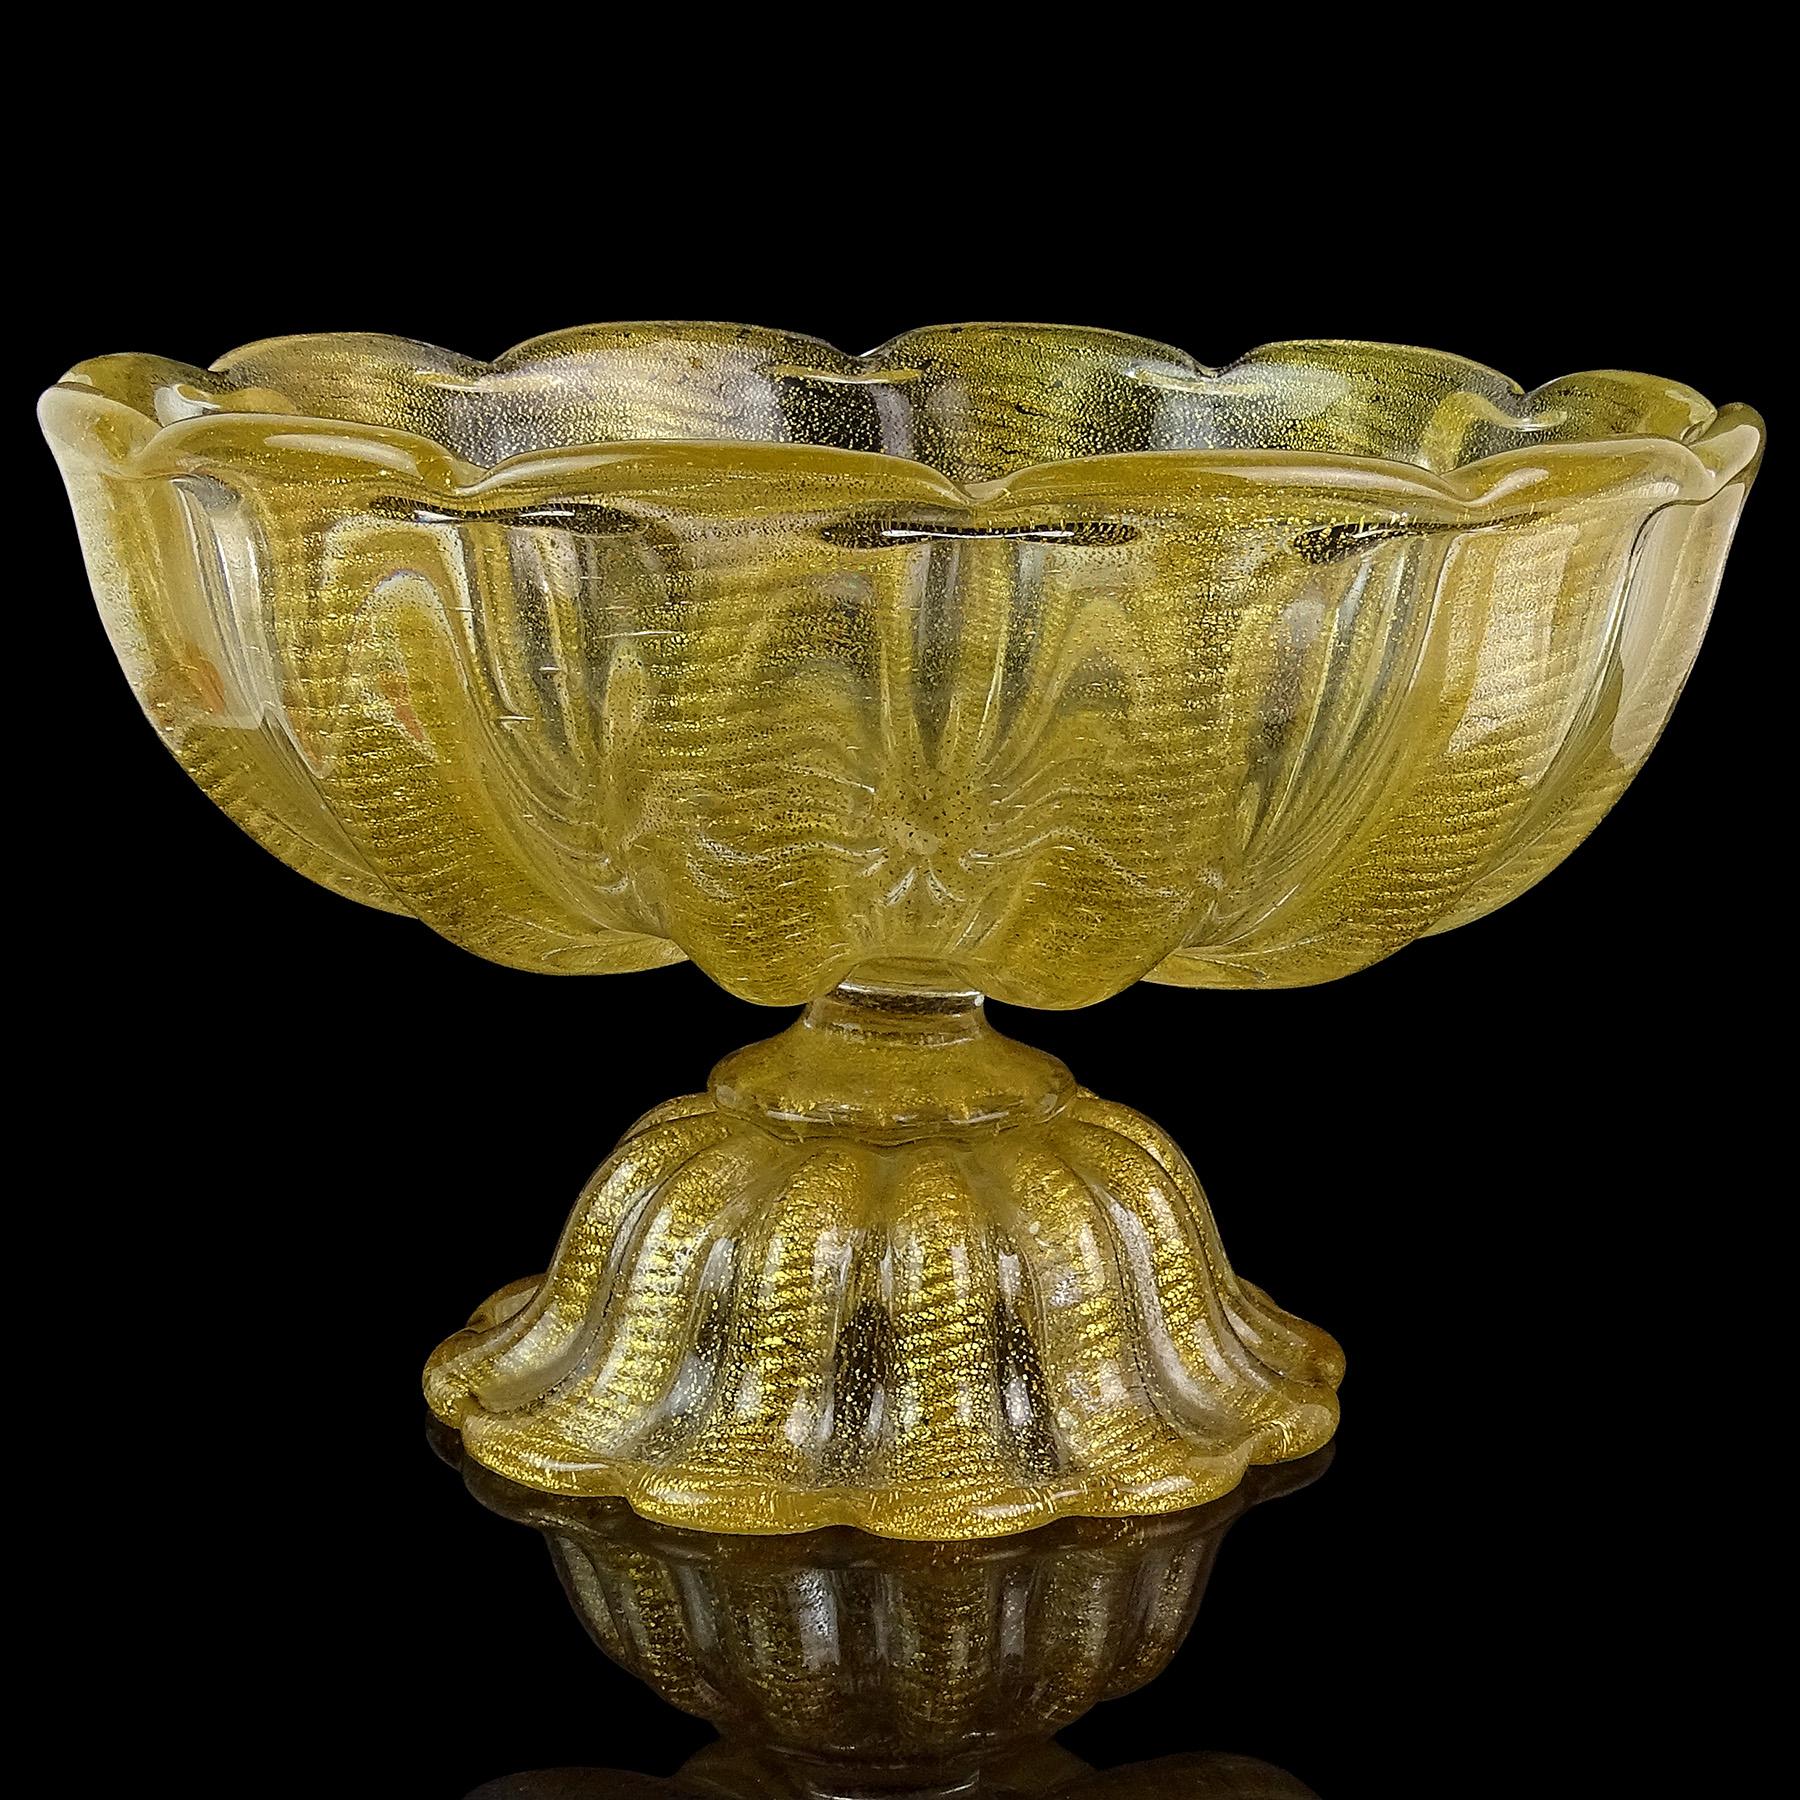 Beautiful, and very large, vintage Murano hand blown gold flecks Italian art glass footed compote bowl. Documented to designer Ercole Barovier for Barovier e Toso, circa 1950s. The bowl has a ribbed design, and scalloped rim, with ropes of gold